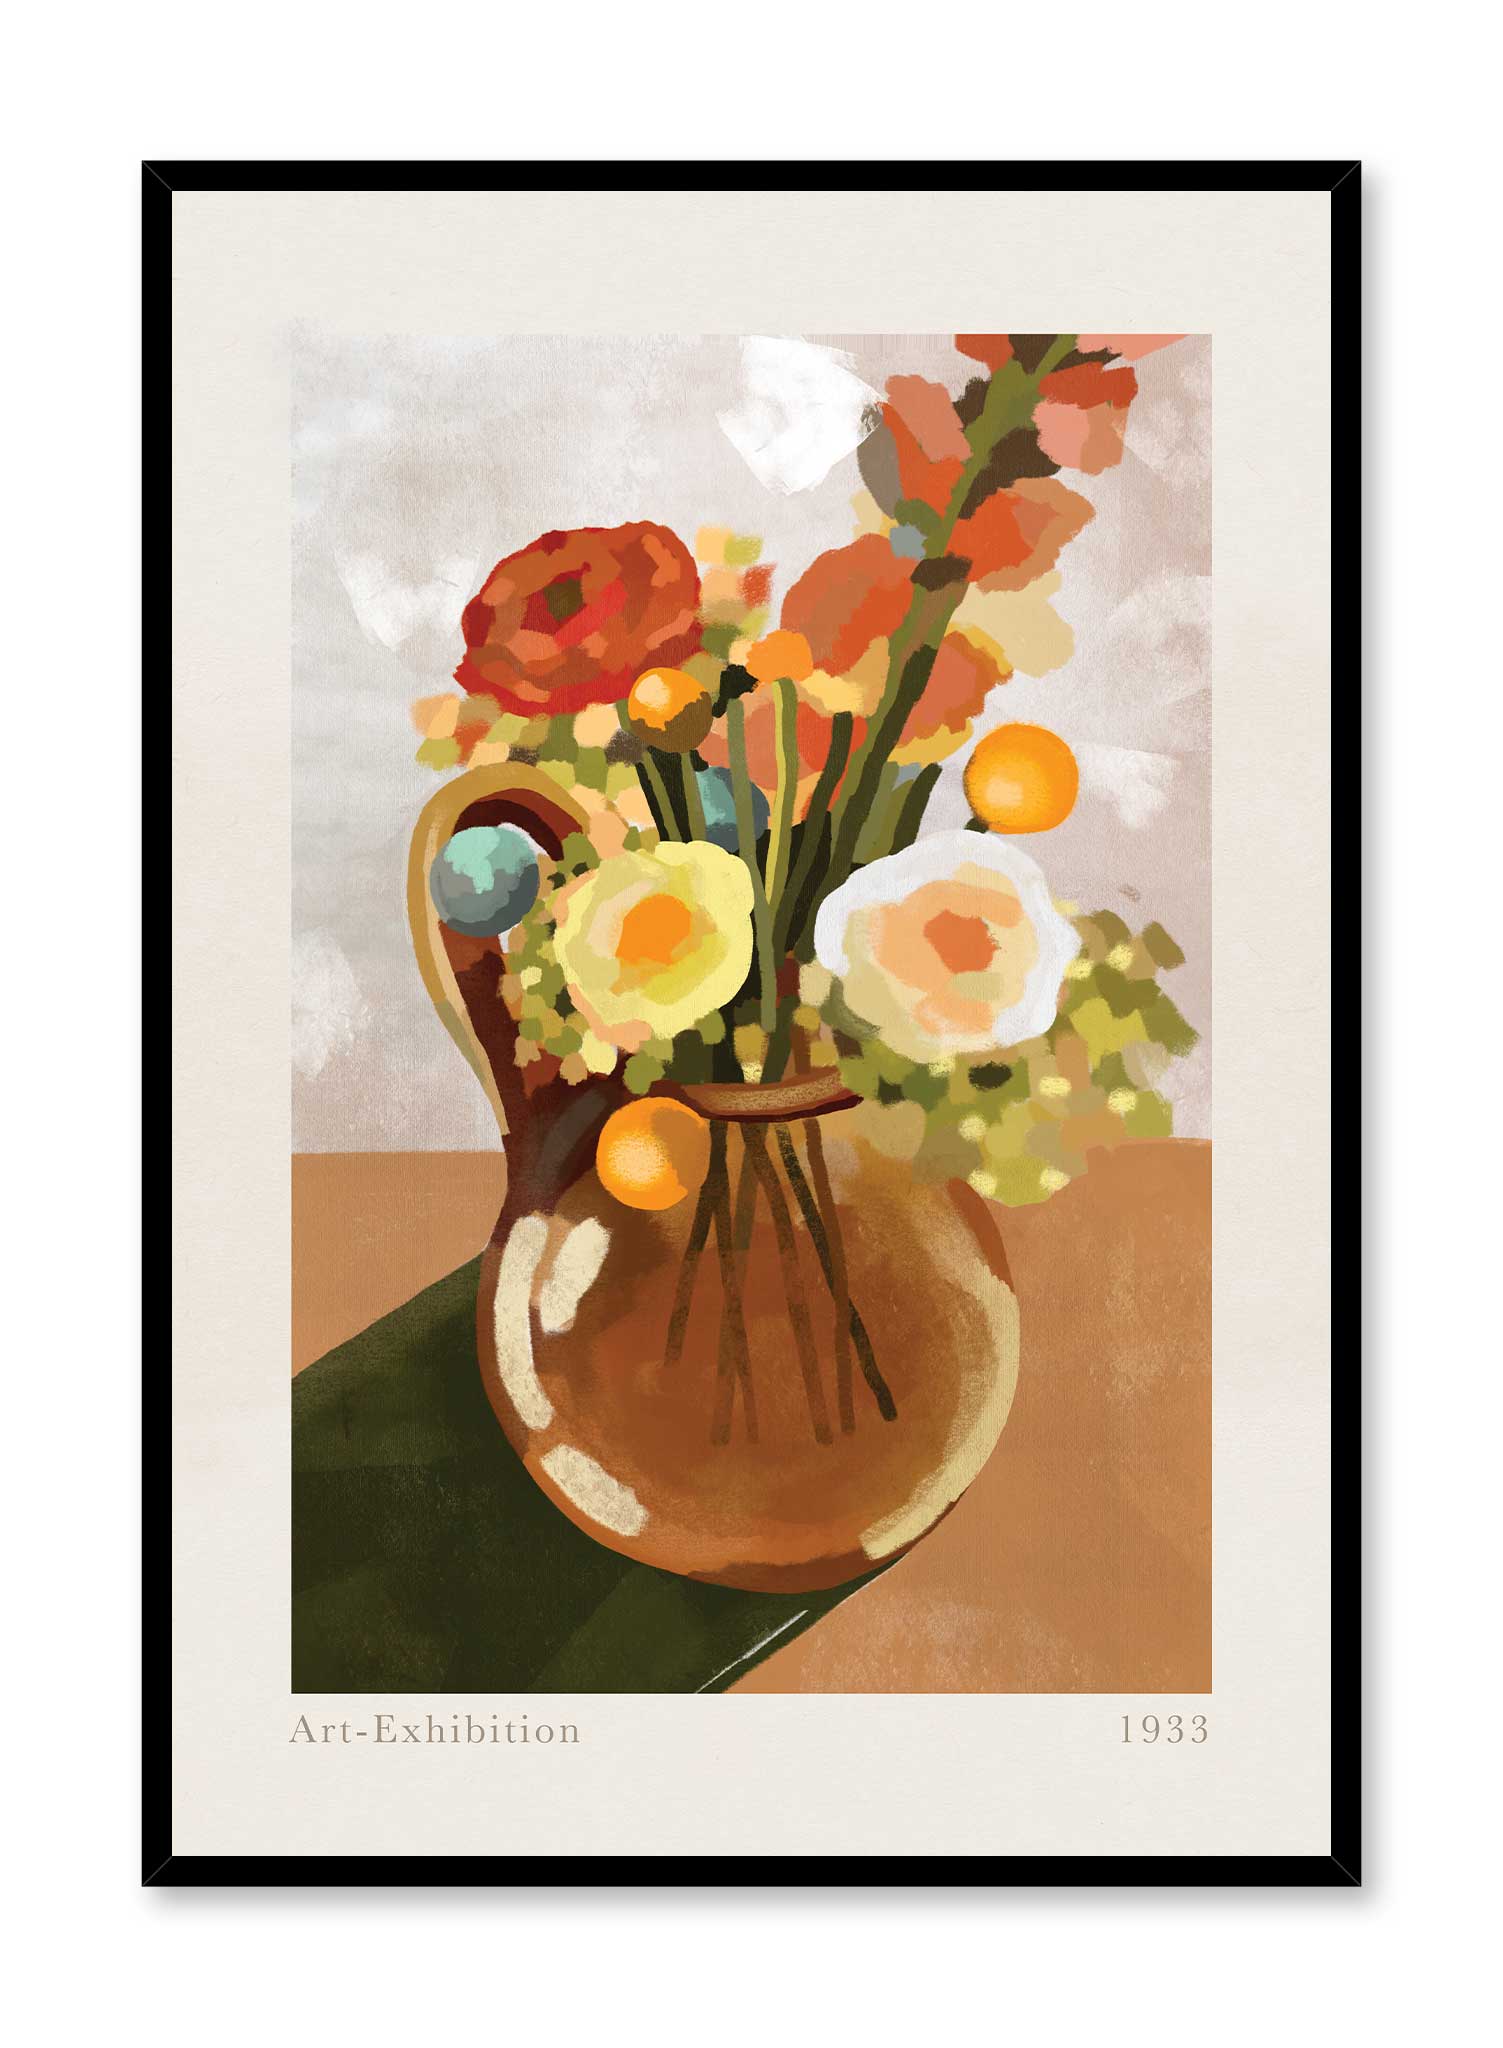 Flower Vase is an illustration of an arrangement of various colourful flowers in a see-through brown vase by Audrey Rivet in collaboration with Opposite Wall.